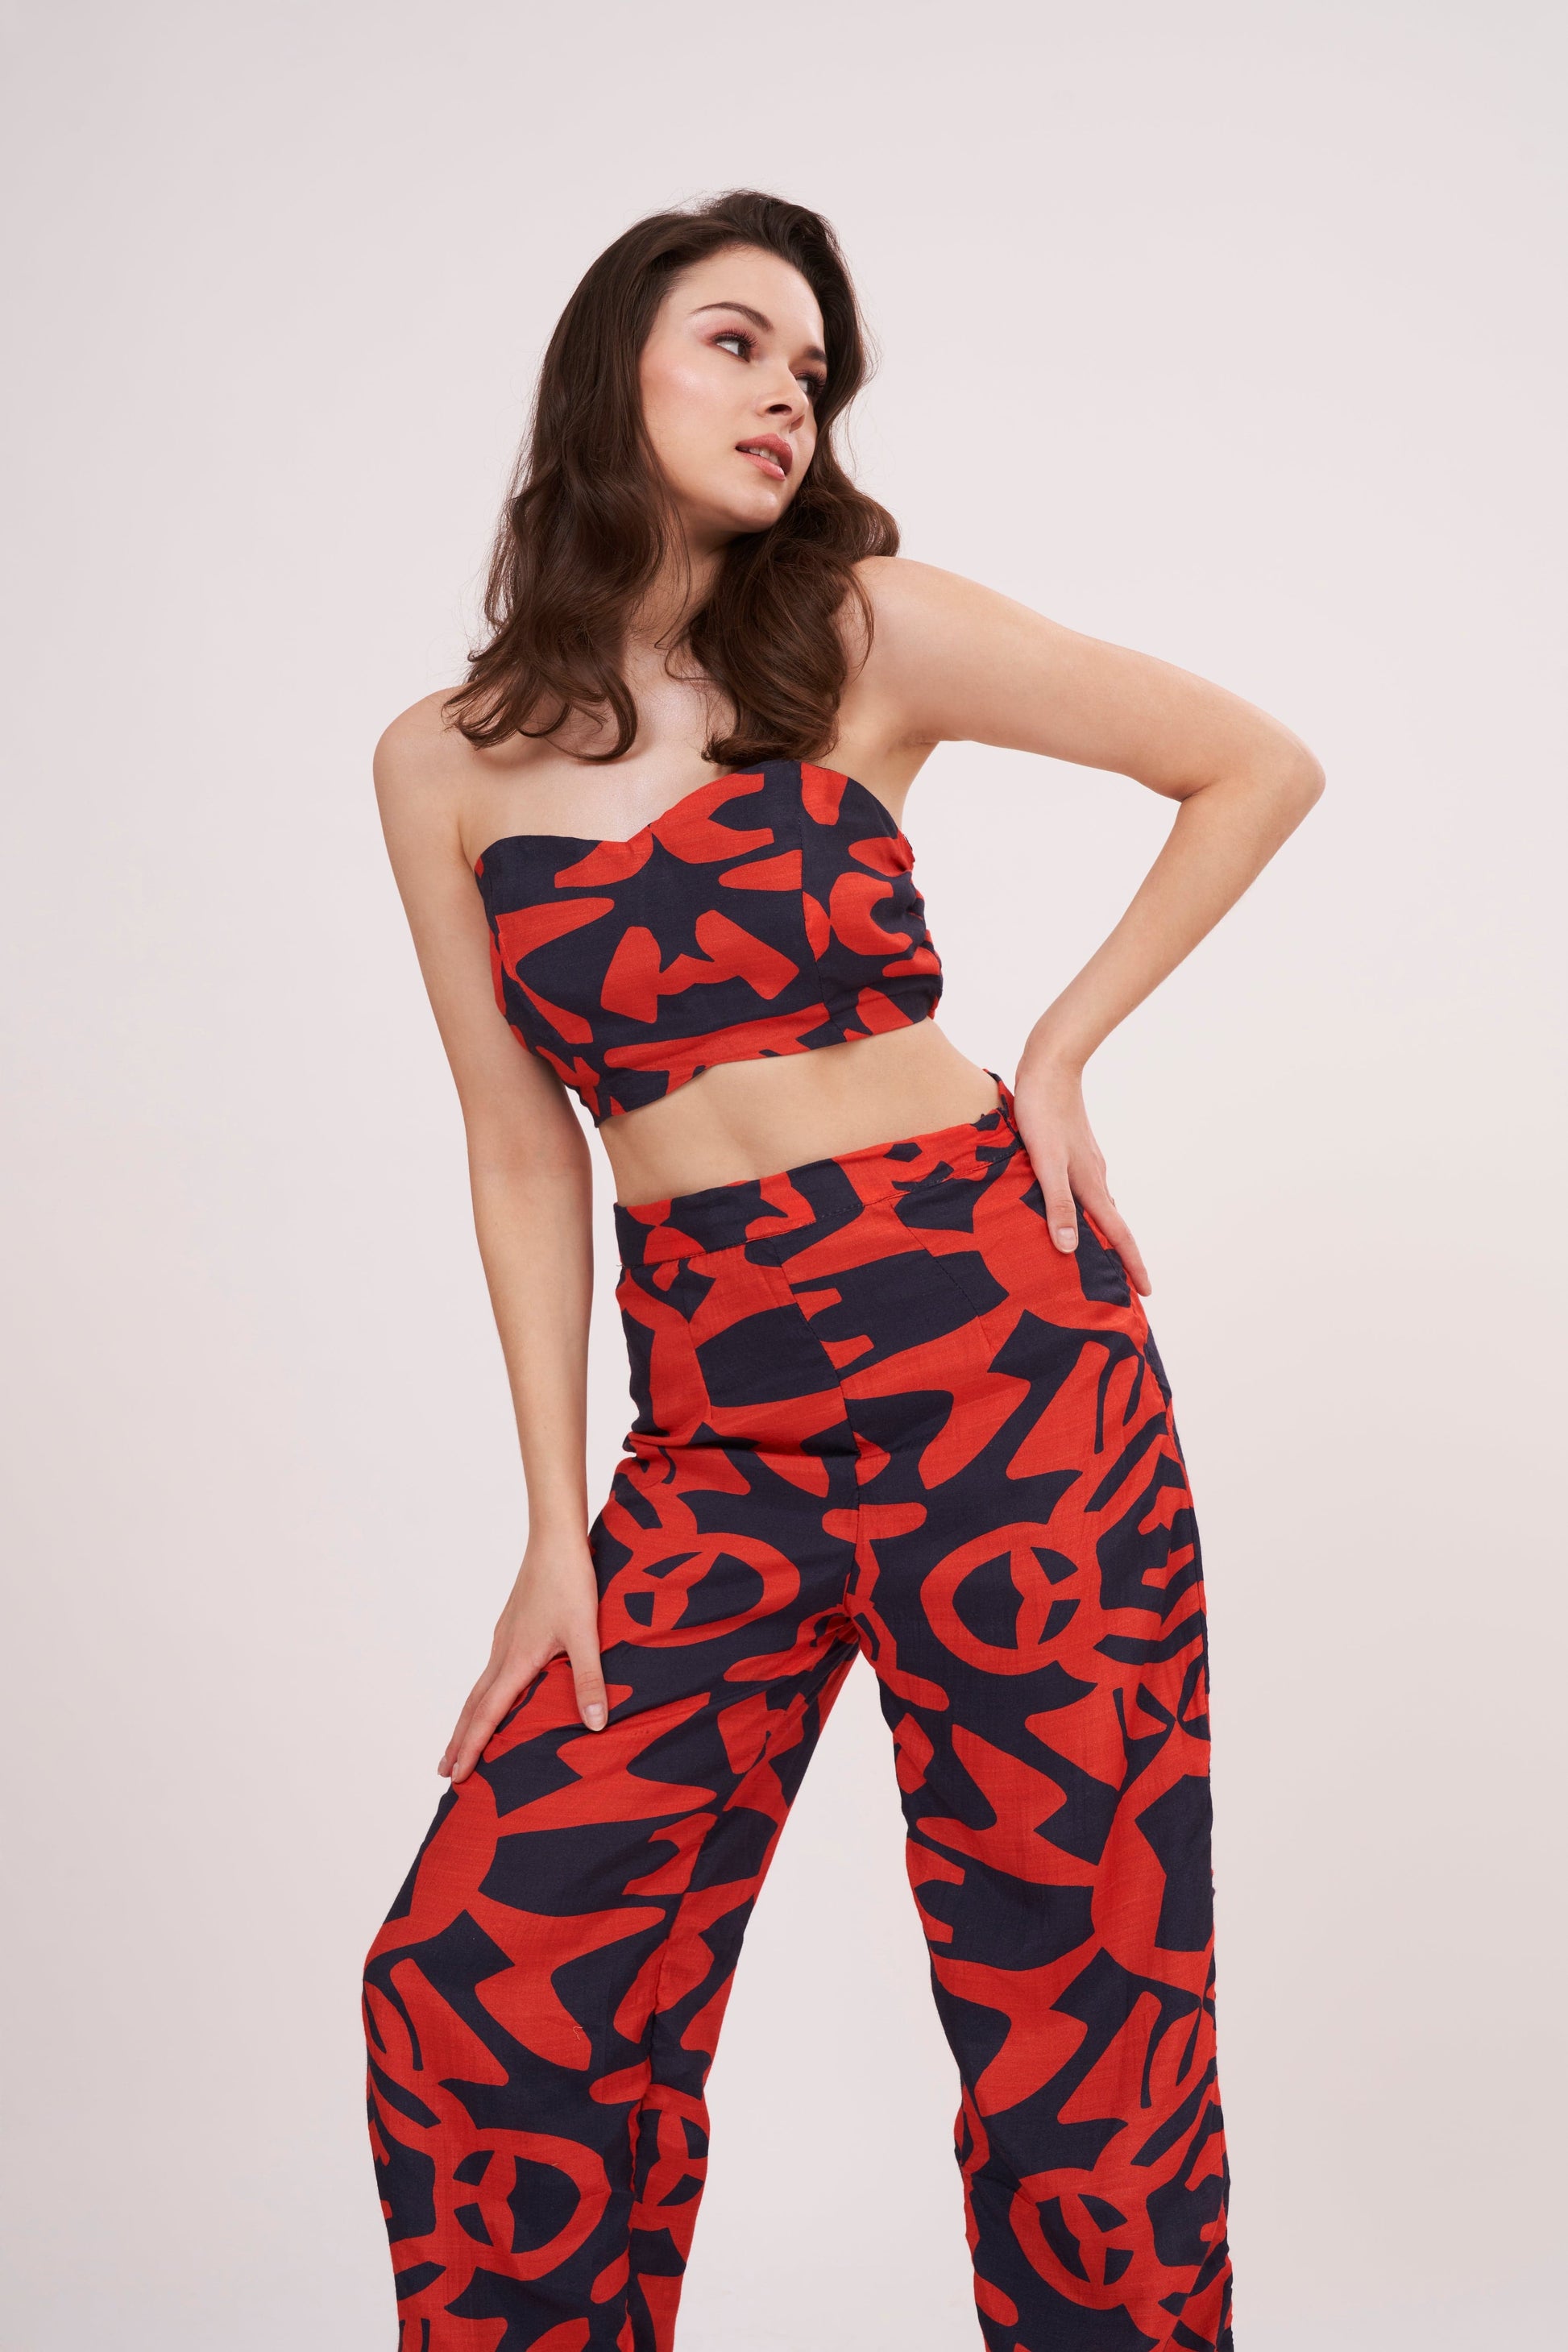 Stylish and comfortable parallel trousers with bold geometric design, crafted from premium muslin fabric, featuring a roomy, flowy silhouette and vibrant colors.